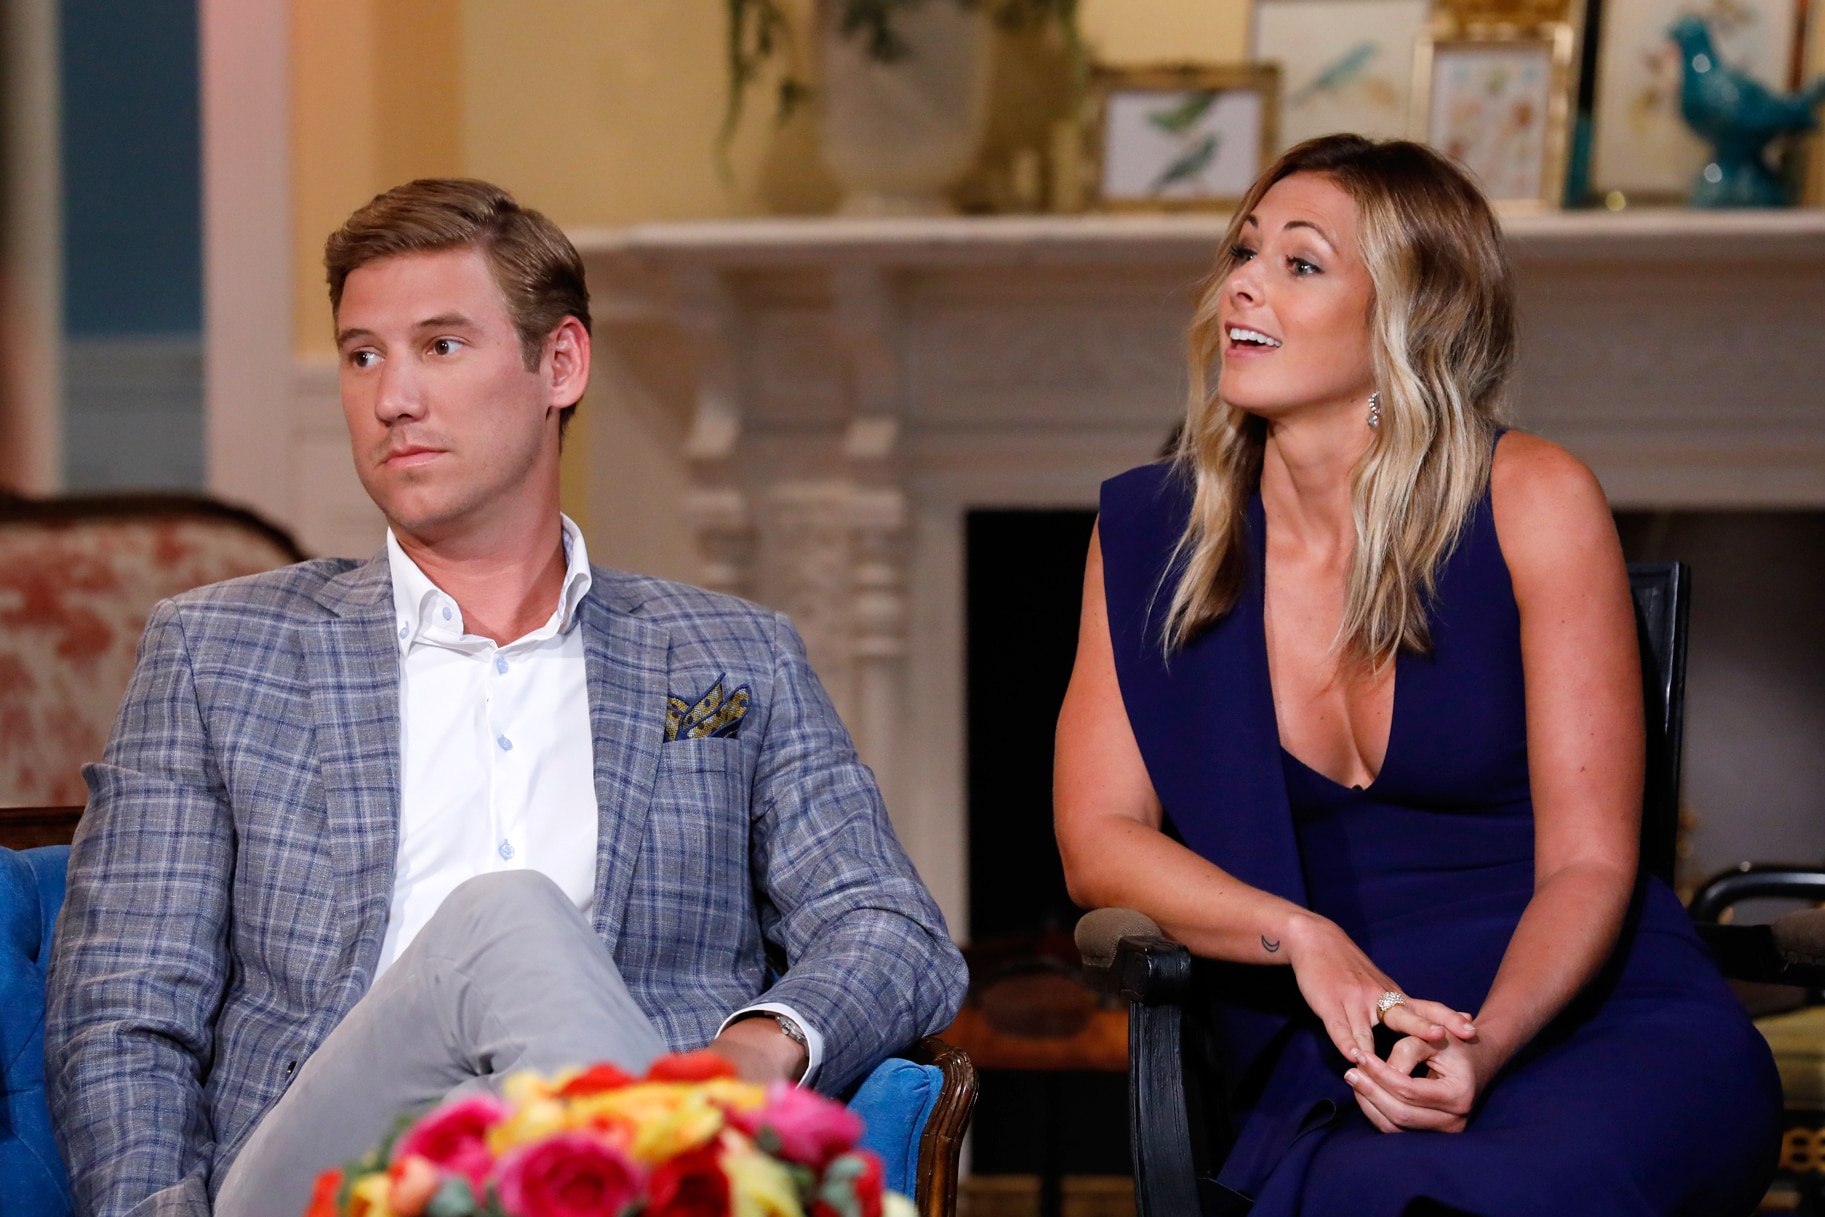 The Most Shocking Revelations From the Southern Charm Season